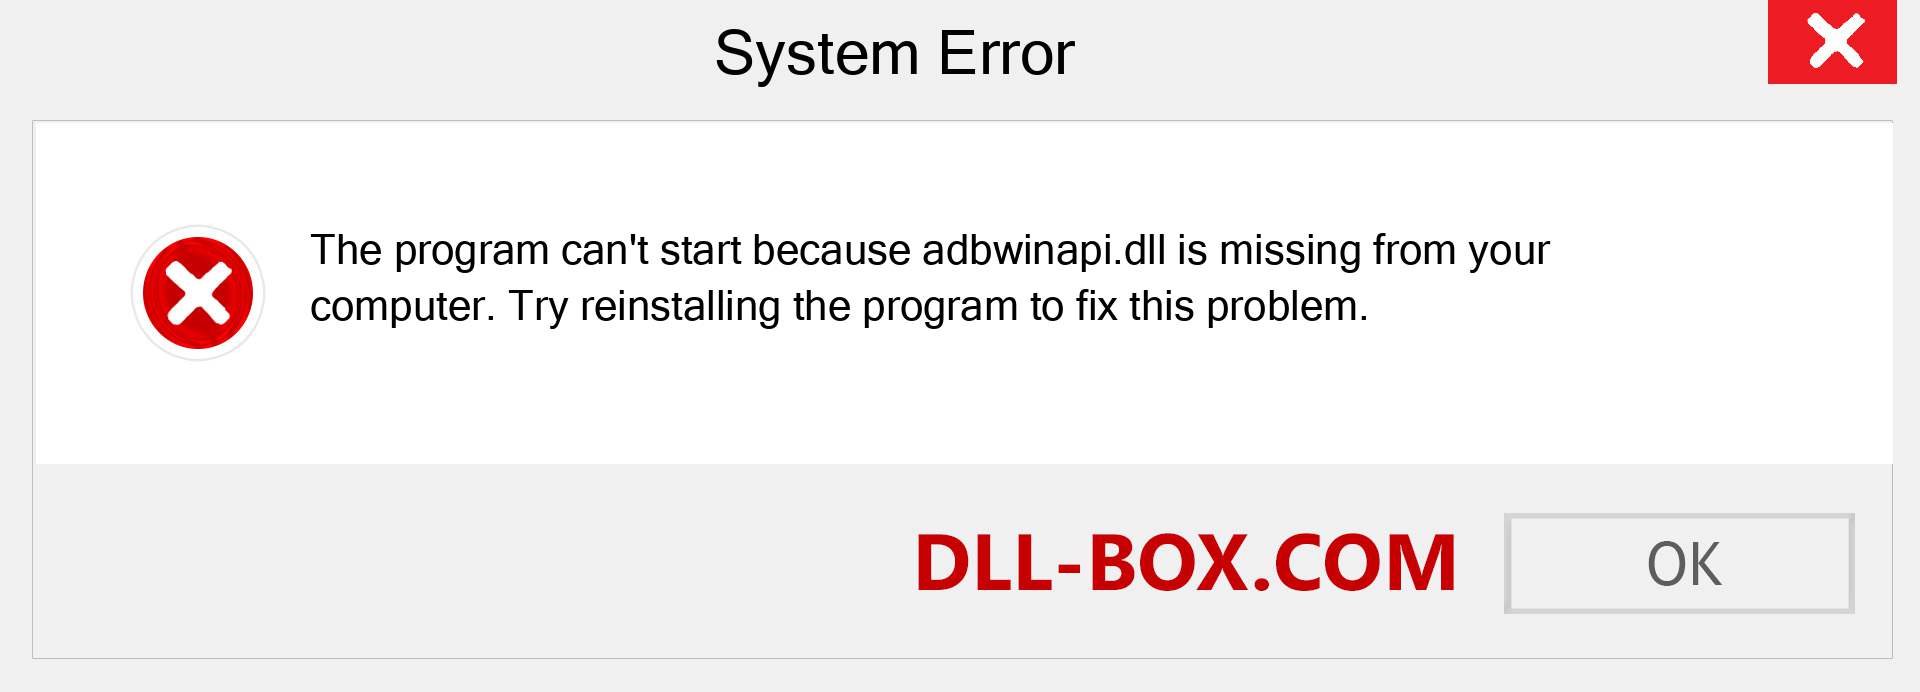  adbwinapi.dll file is missing?. Download for Windows 7, 8, 10 - Fix  adbwinapi dll Missing Error on Windows, photos, images